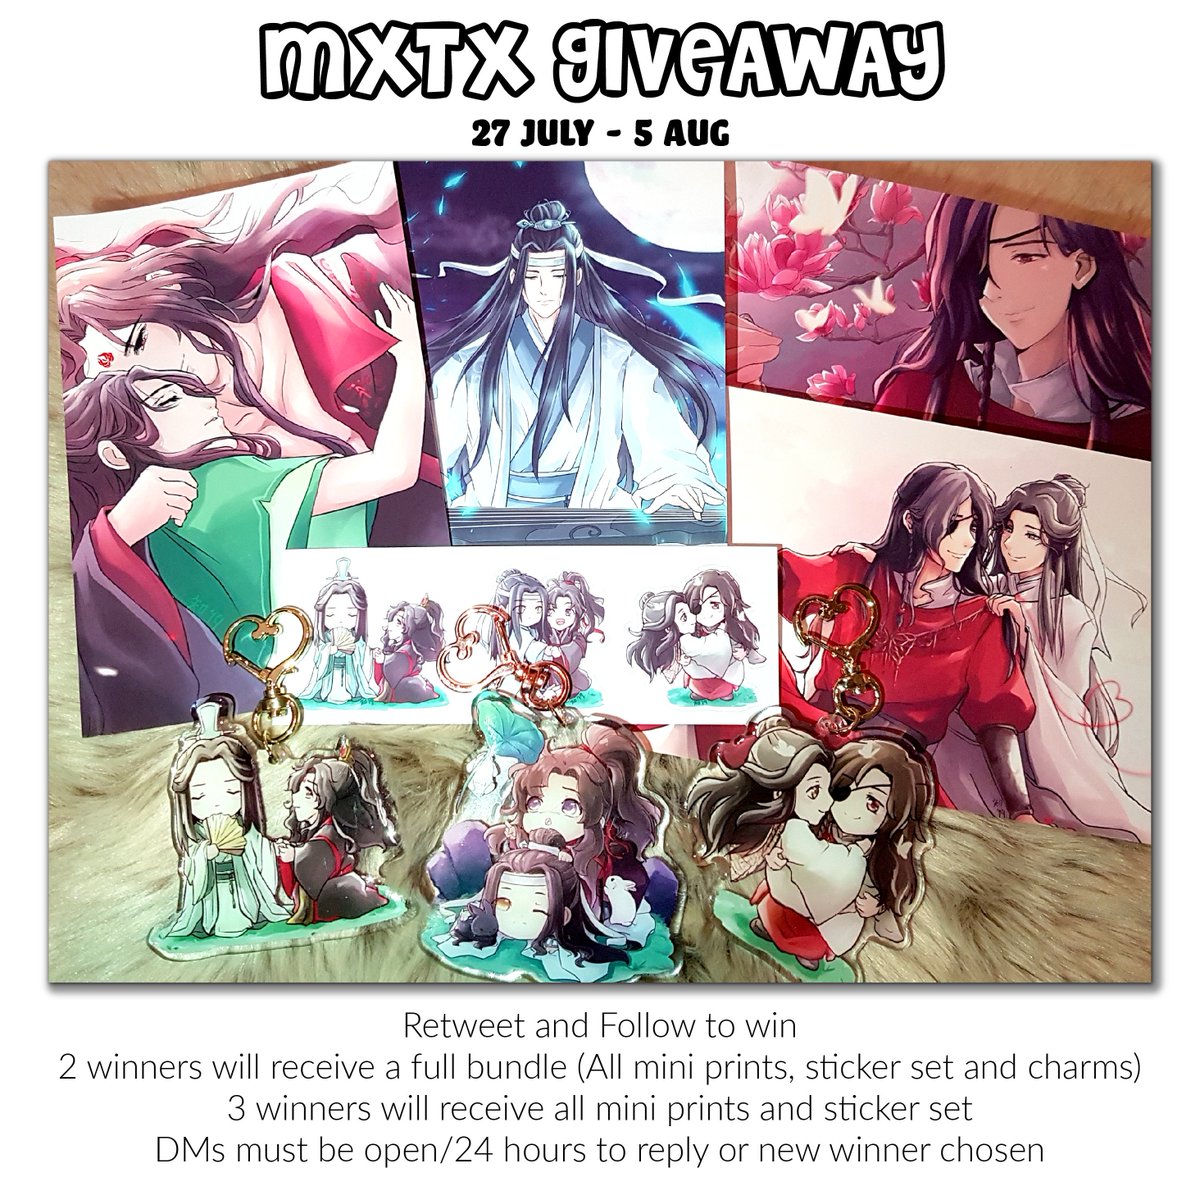 Finally doing that 500, err 600+ MXTX giveaway like I promised!
Thank you everyone for the support 🥰
-RT + Follow to enter
-2 Winners get full bundles
-3 Winners get prints + Sticker sets
-International shipping provided
#人渣反派自救系统 #魔道祖师 #天官赐福